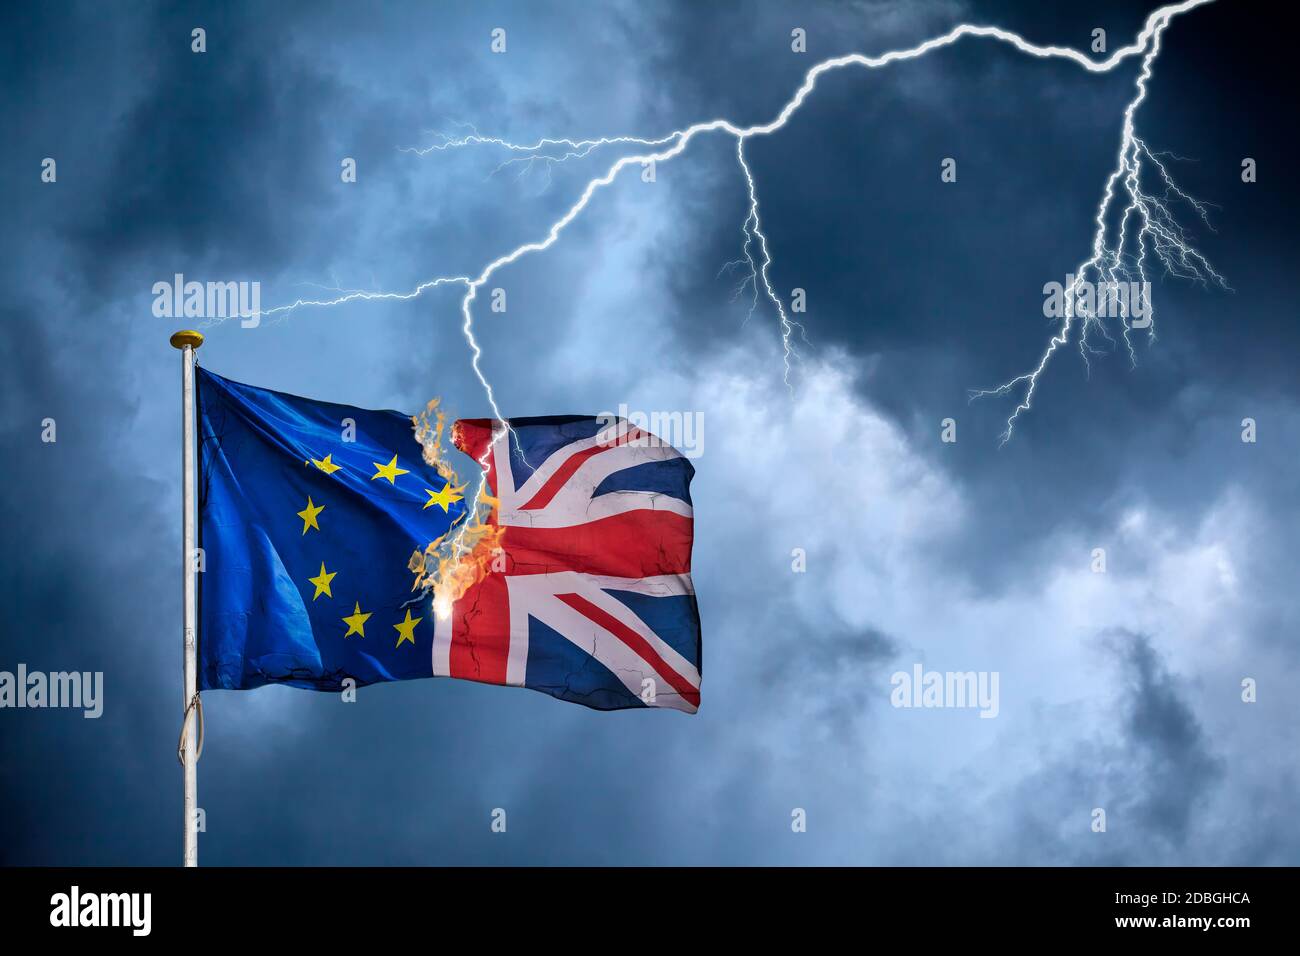 Concept of the British Brexit with the English flag struck by lightning in a heavy storm Stock Photo